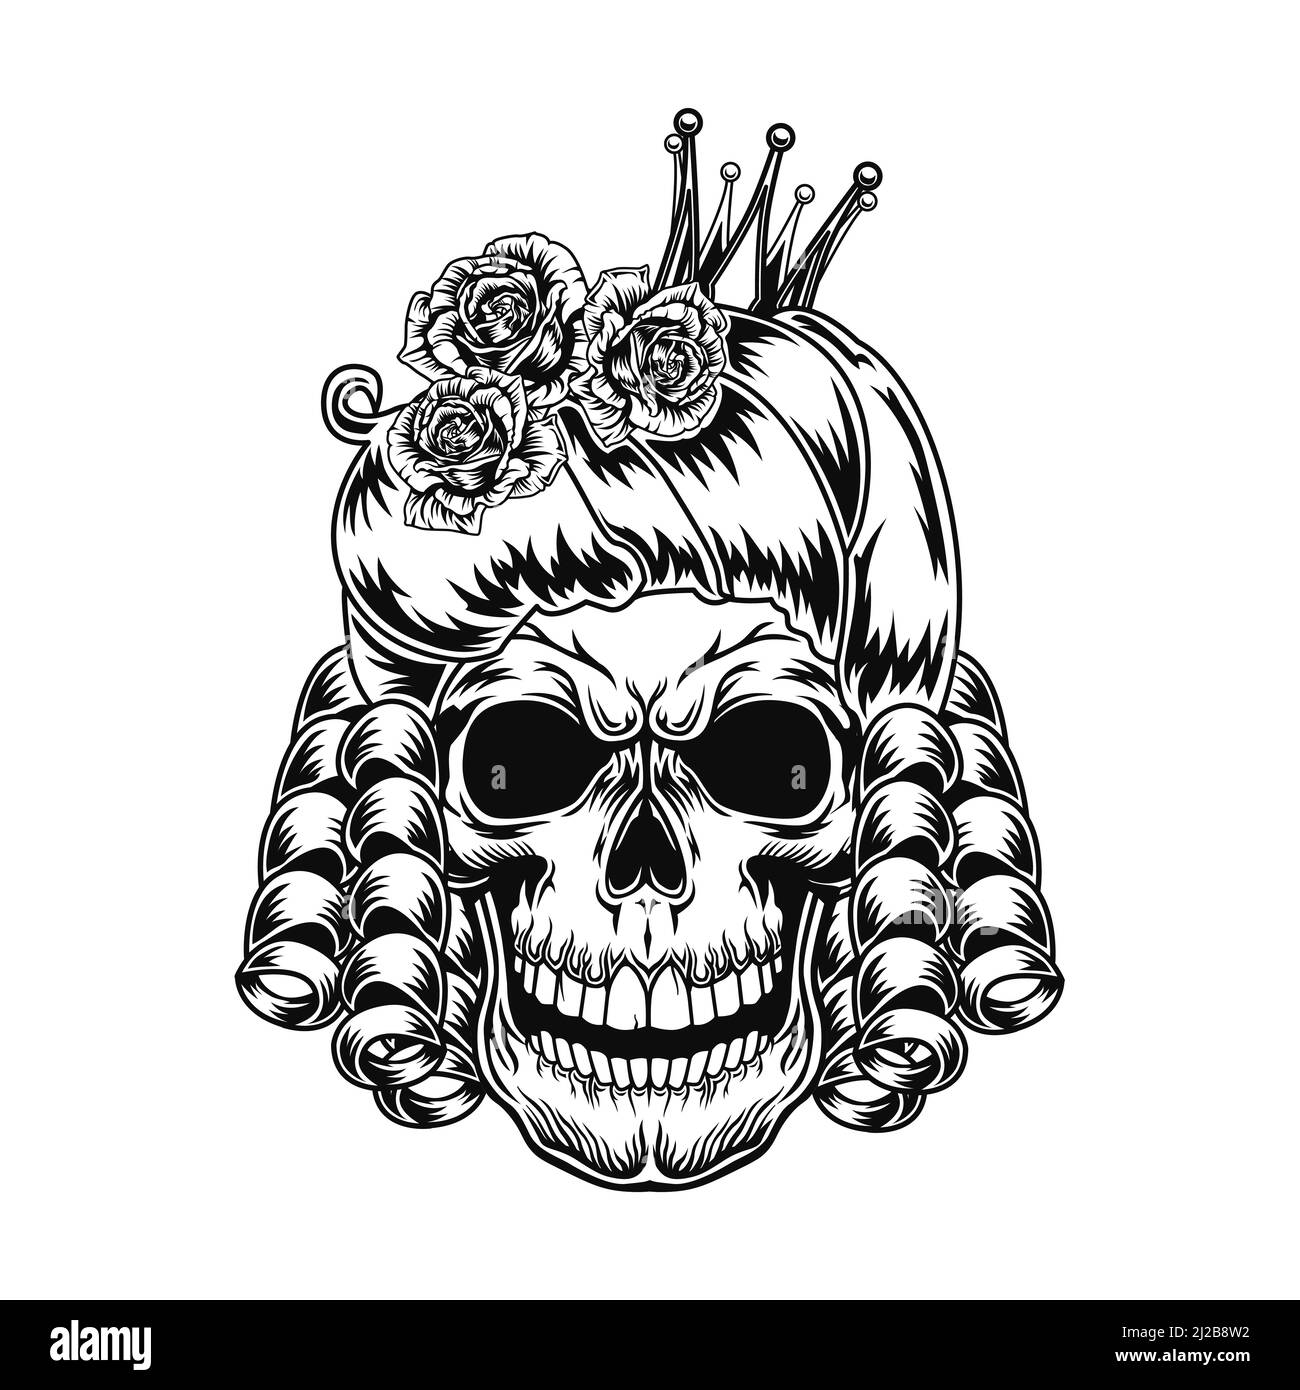 Skull of queen vector illustration. Head of scary character with royal hairstyle and crown. Authority concept for monarchy topics or tattoo template Stock Vector